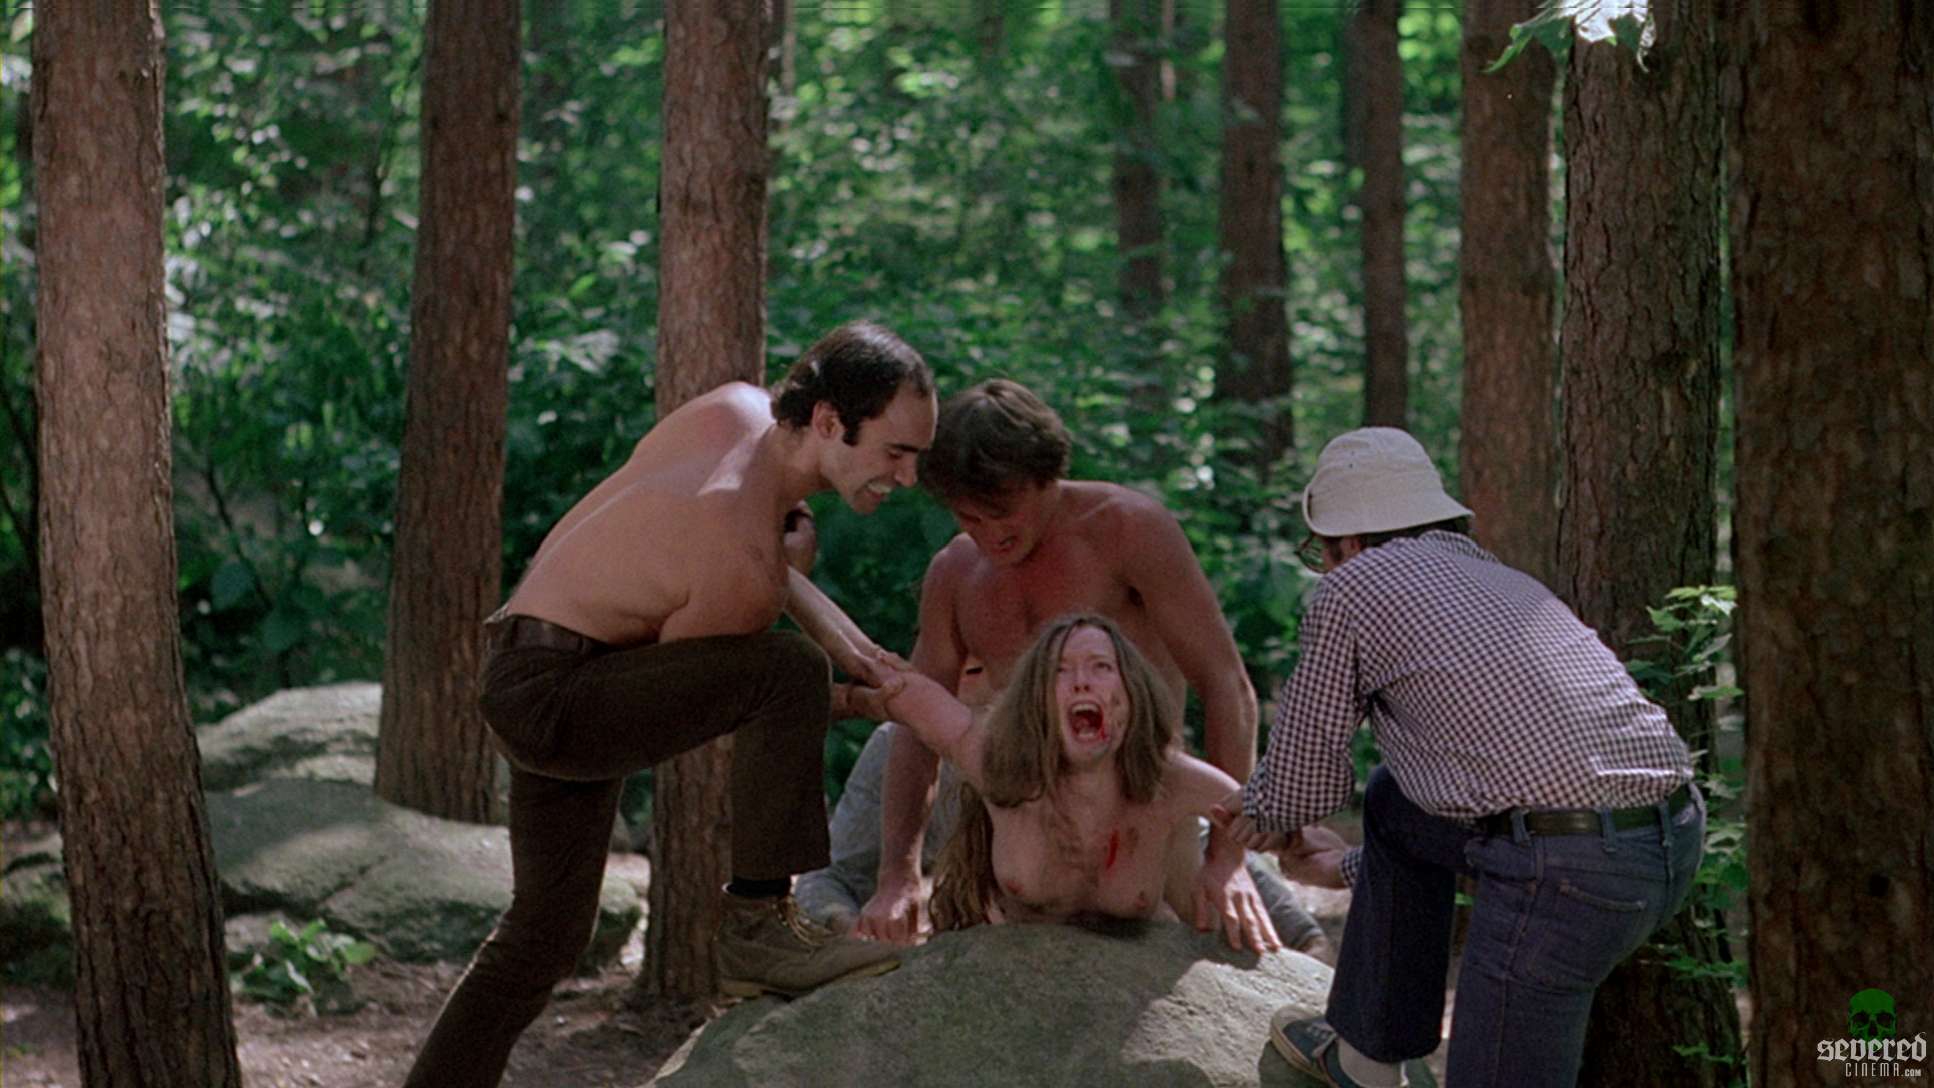 Rape scene from I Spit on Your Grave.